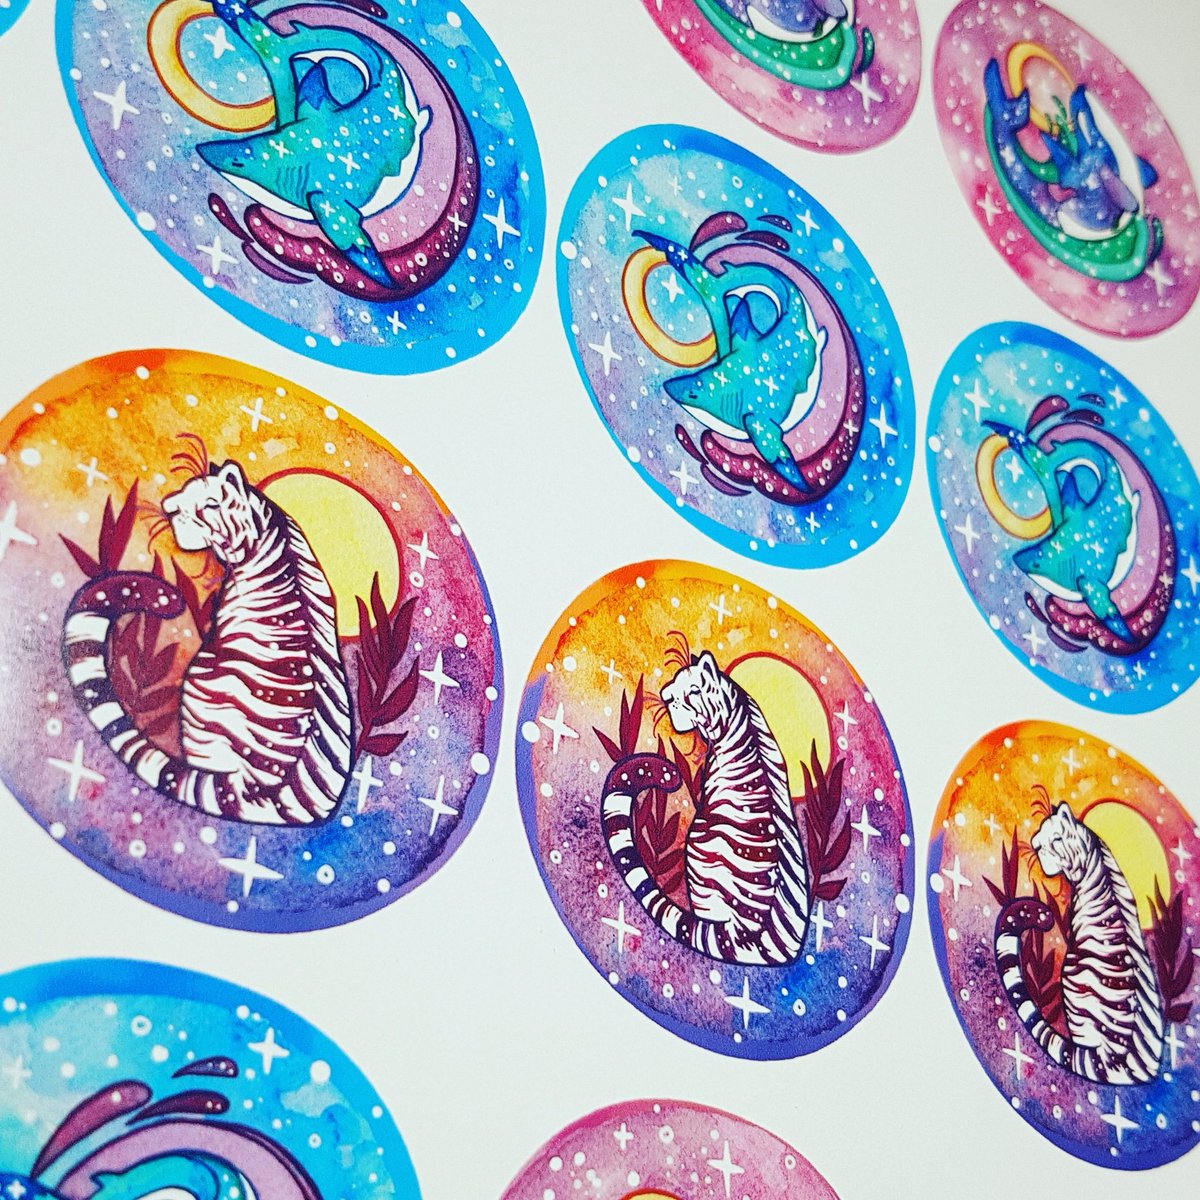 New tiger, shark and orca badge designs pressed and now availible on my Etsy store! 🐯🦈🐳  😊💫 #orca #shark #tiger #animalart #traditionalart  #watercolor #watercolourgalaxy #badges #buttons